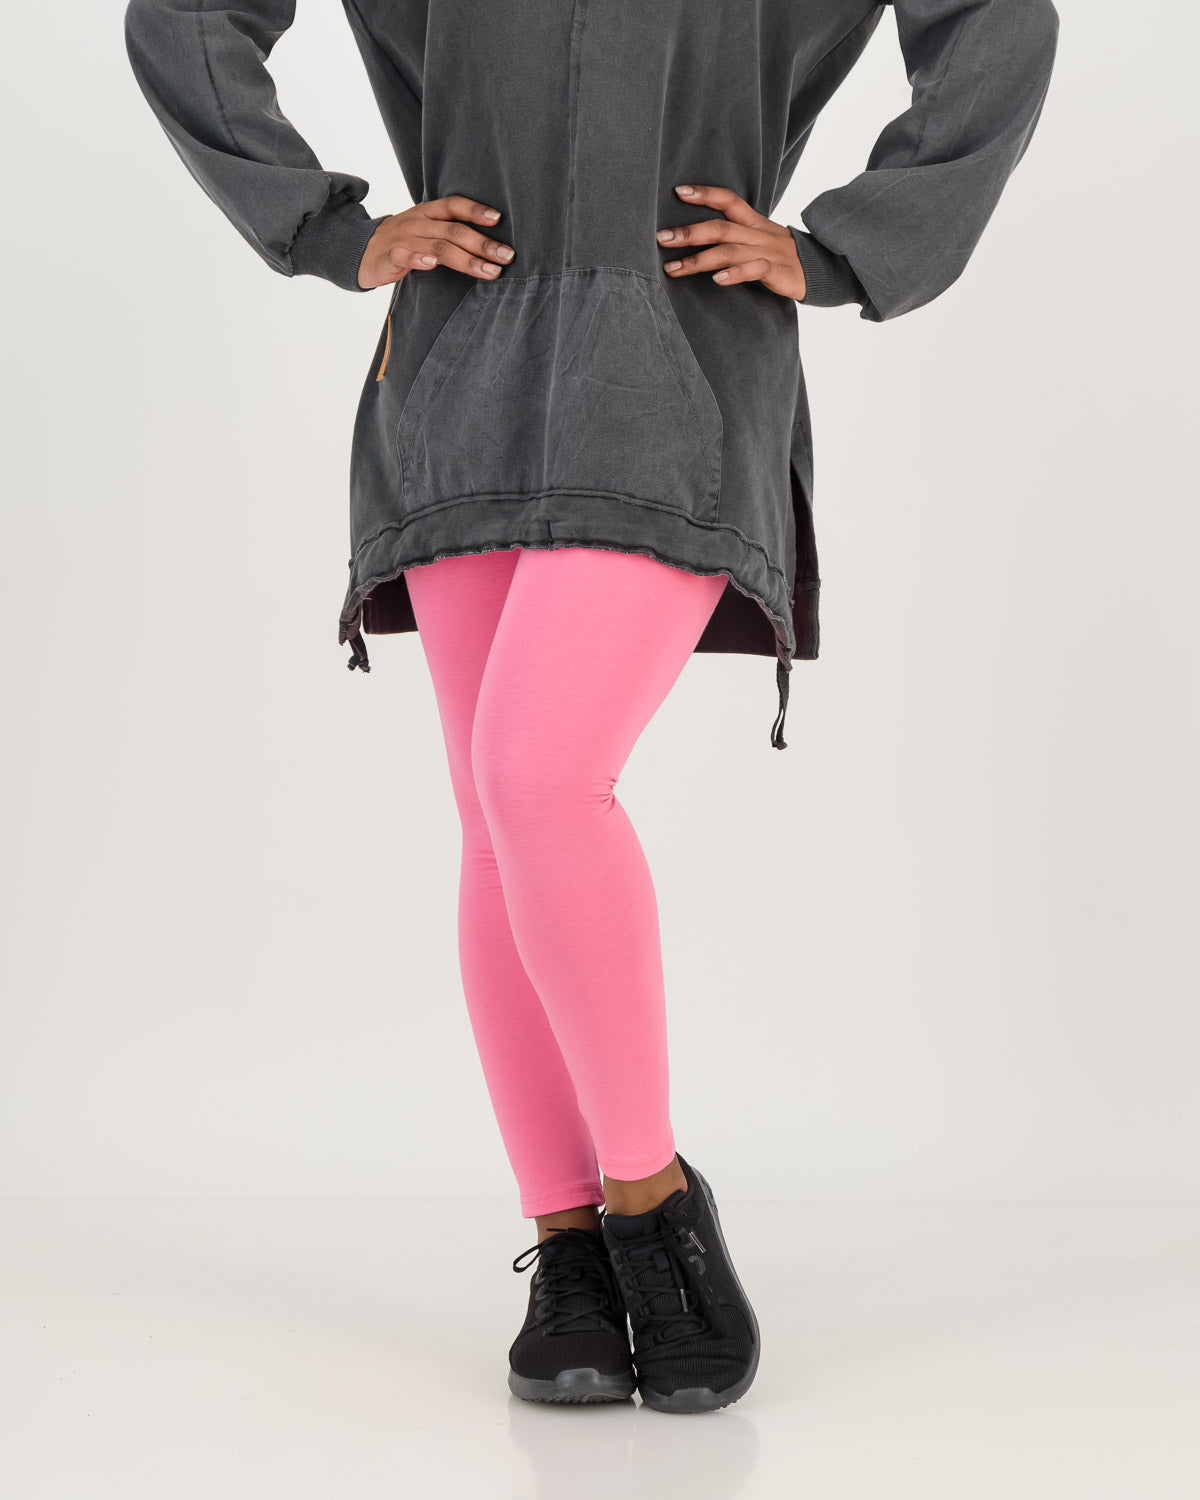 cotton leggings, pink bubblegum color with charcoal color long hoody